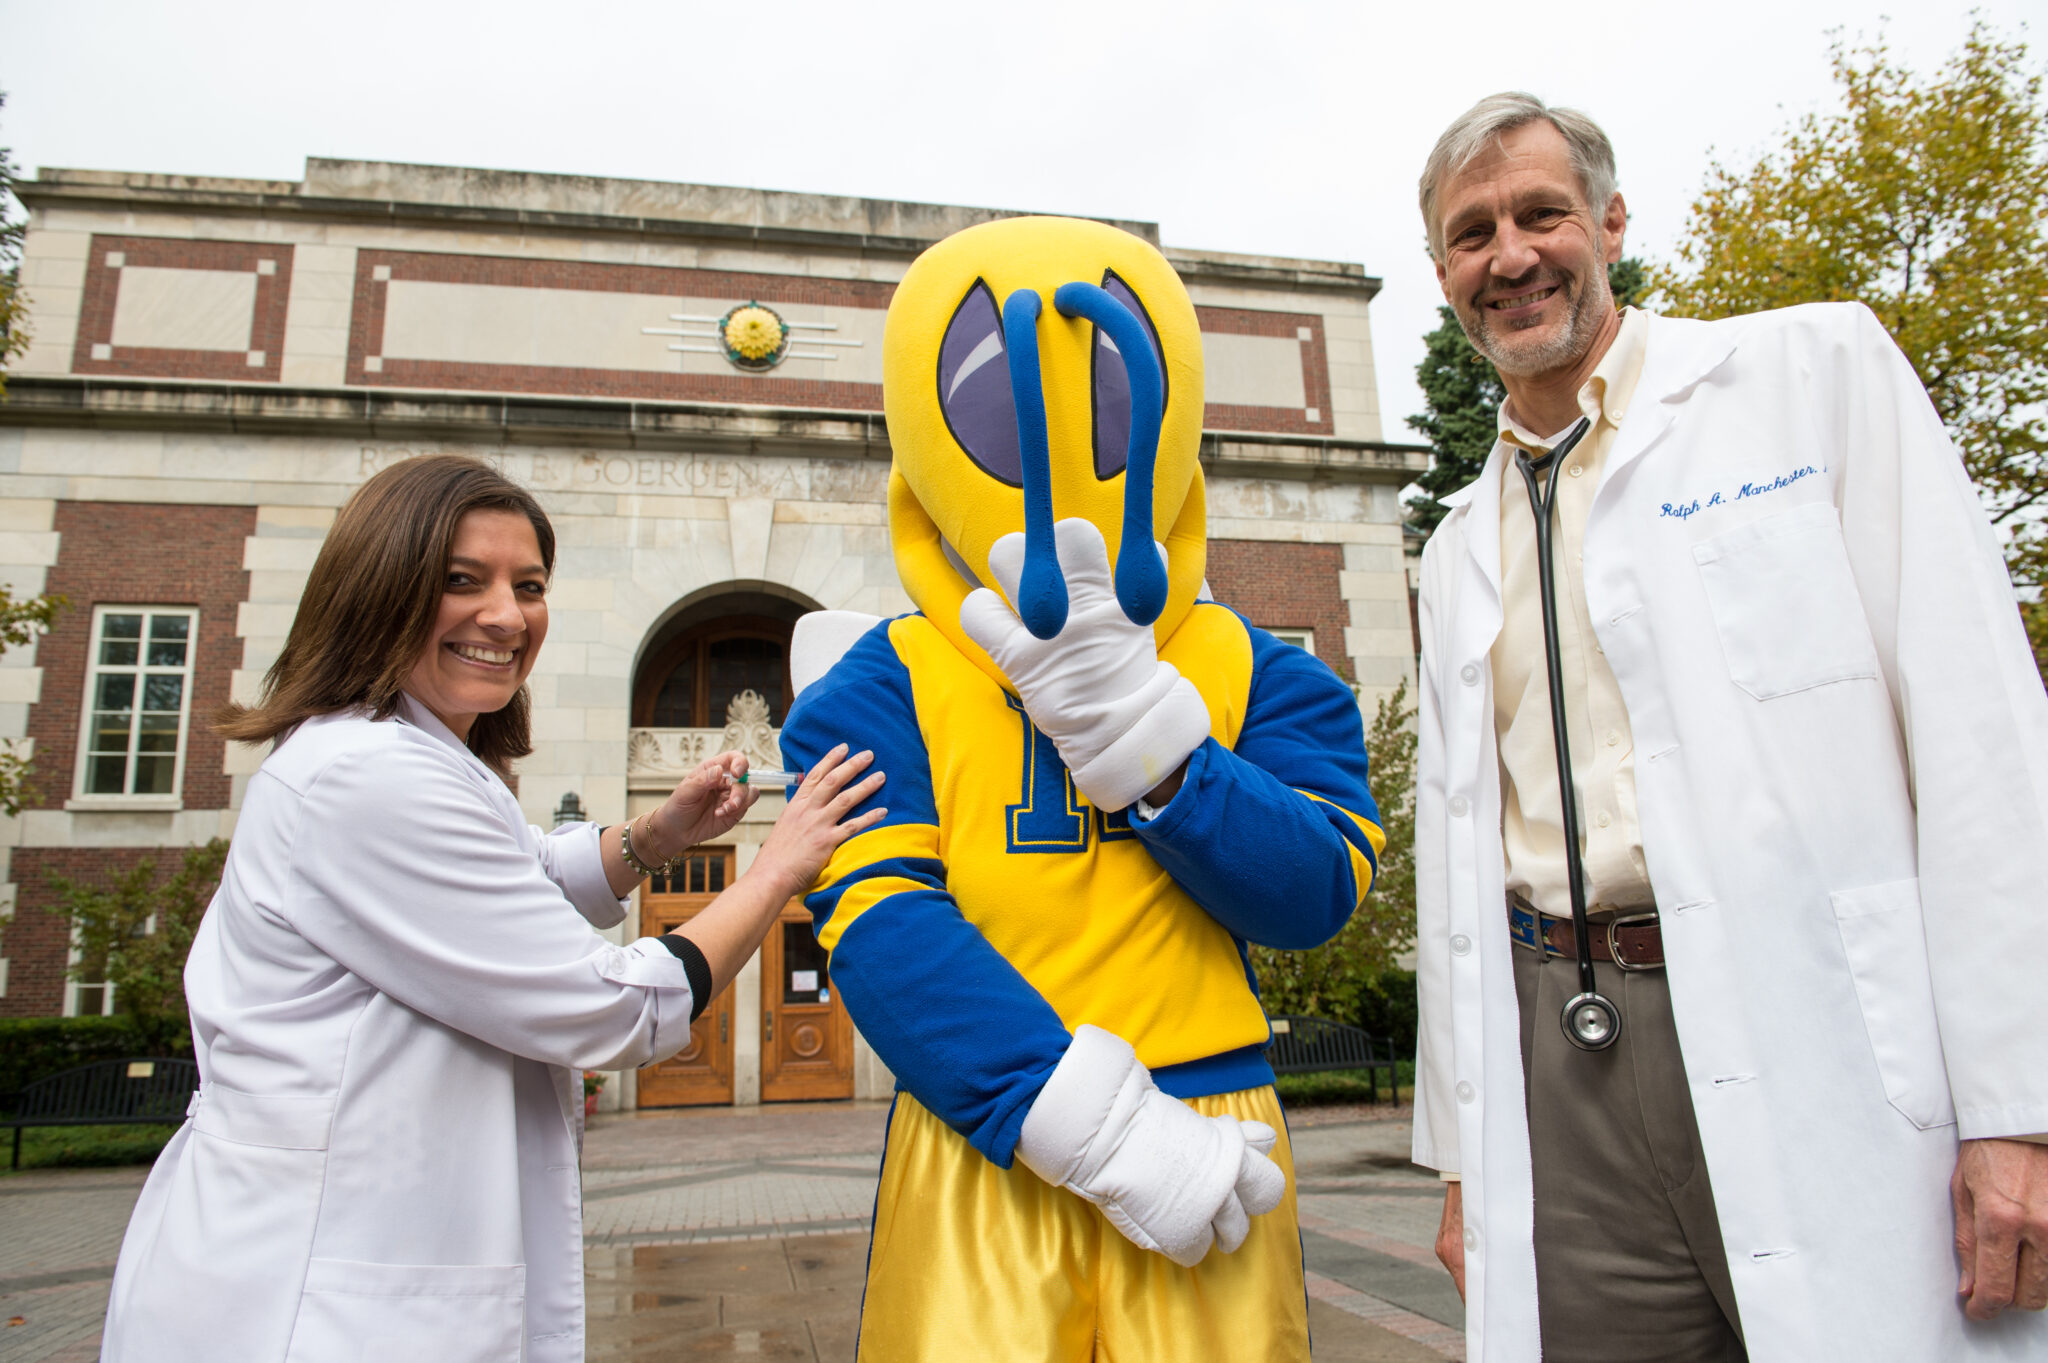 Two health care workers in white coats administered a flu shot to University of Rochester mascot Rocky.